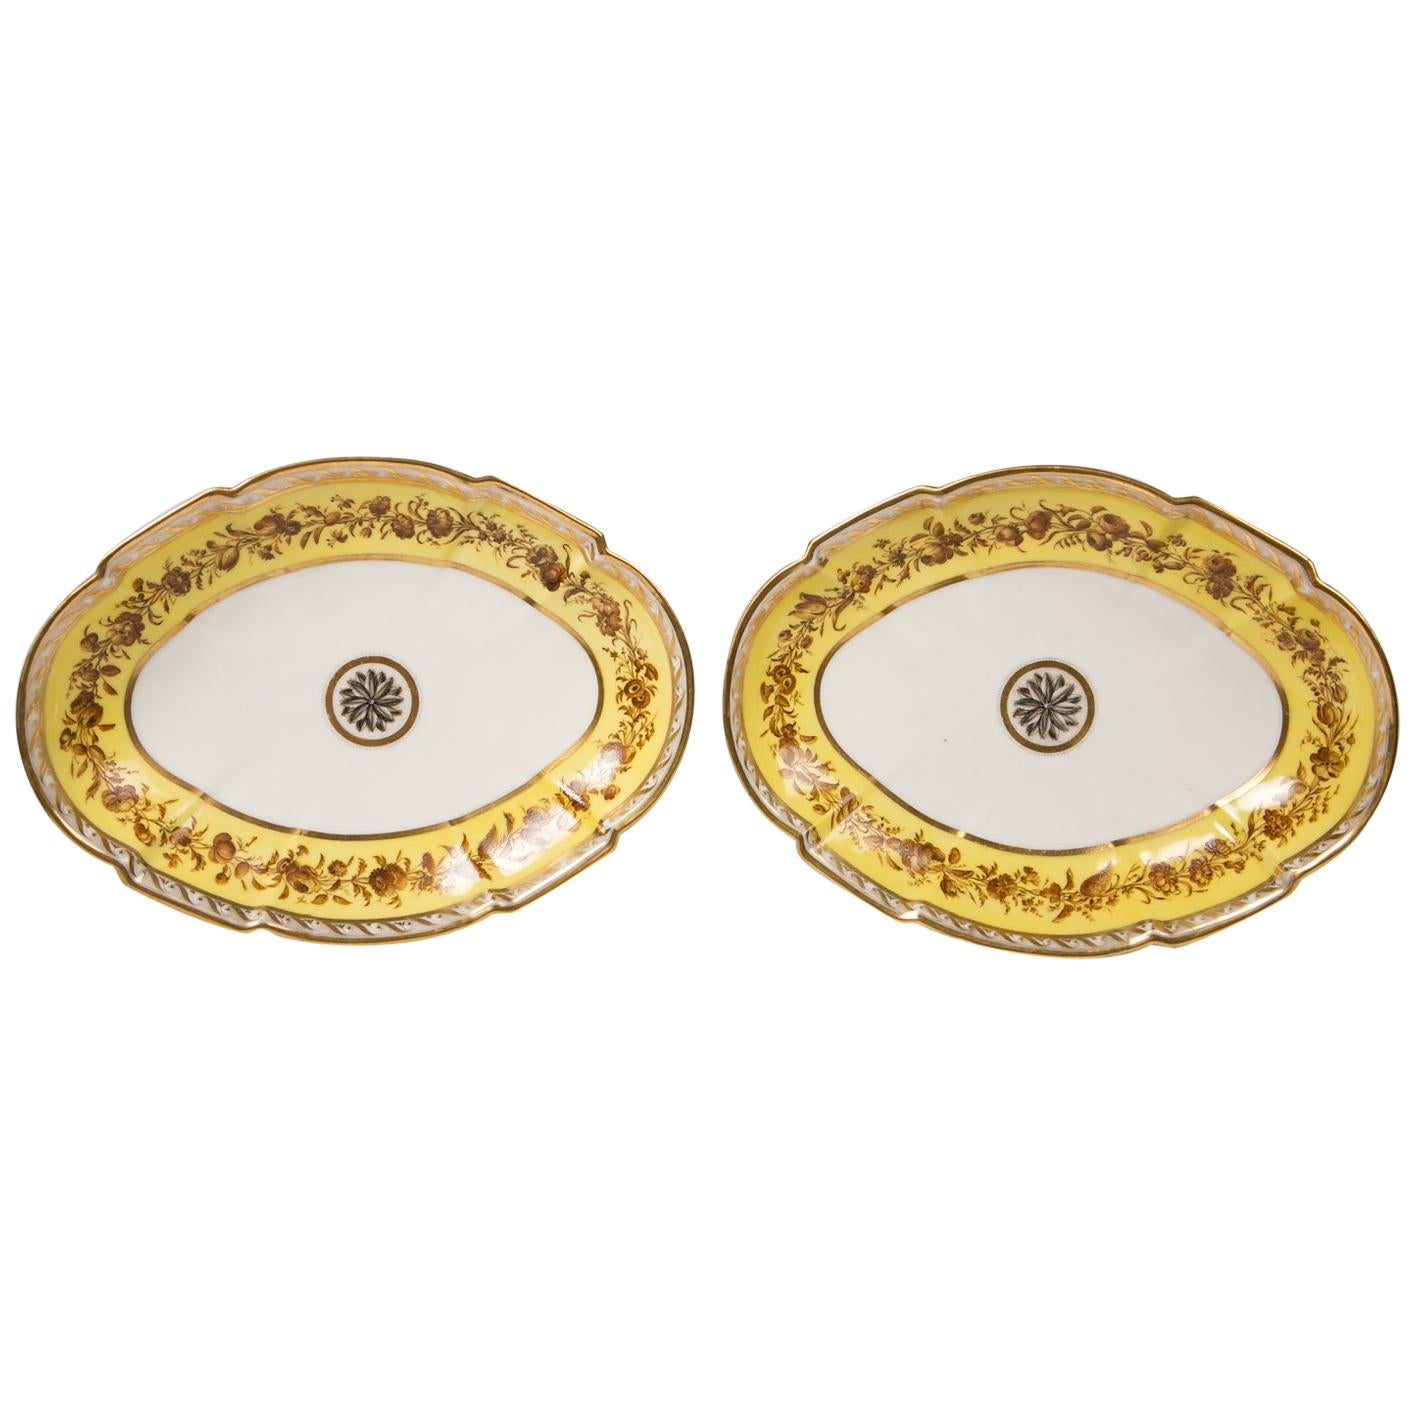 Pair of Neoclassical French Dishes, Made by Dihl et Guehard Late 18th Century